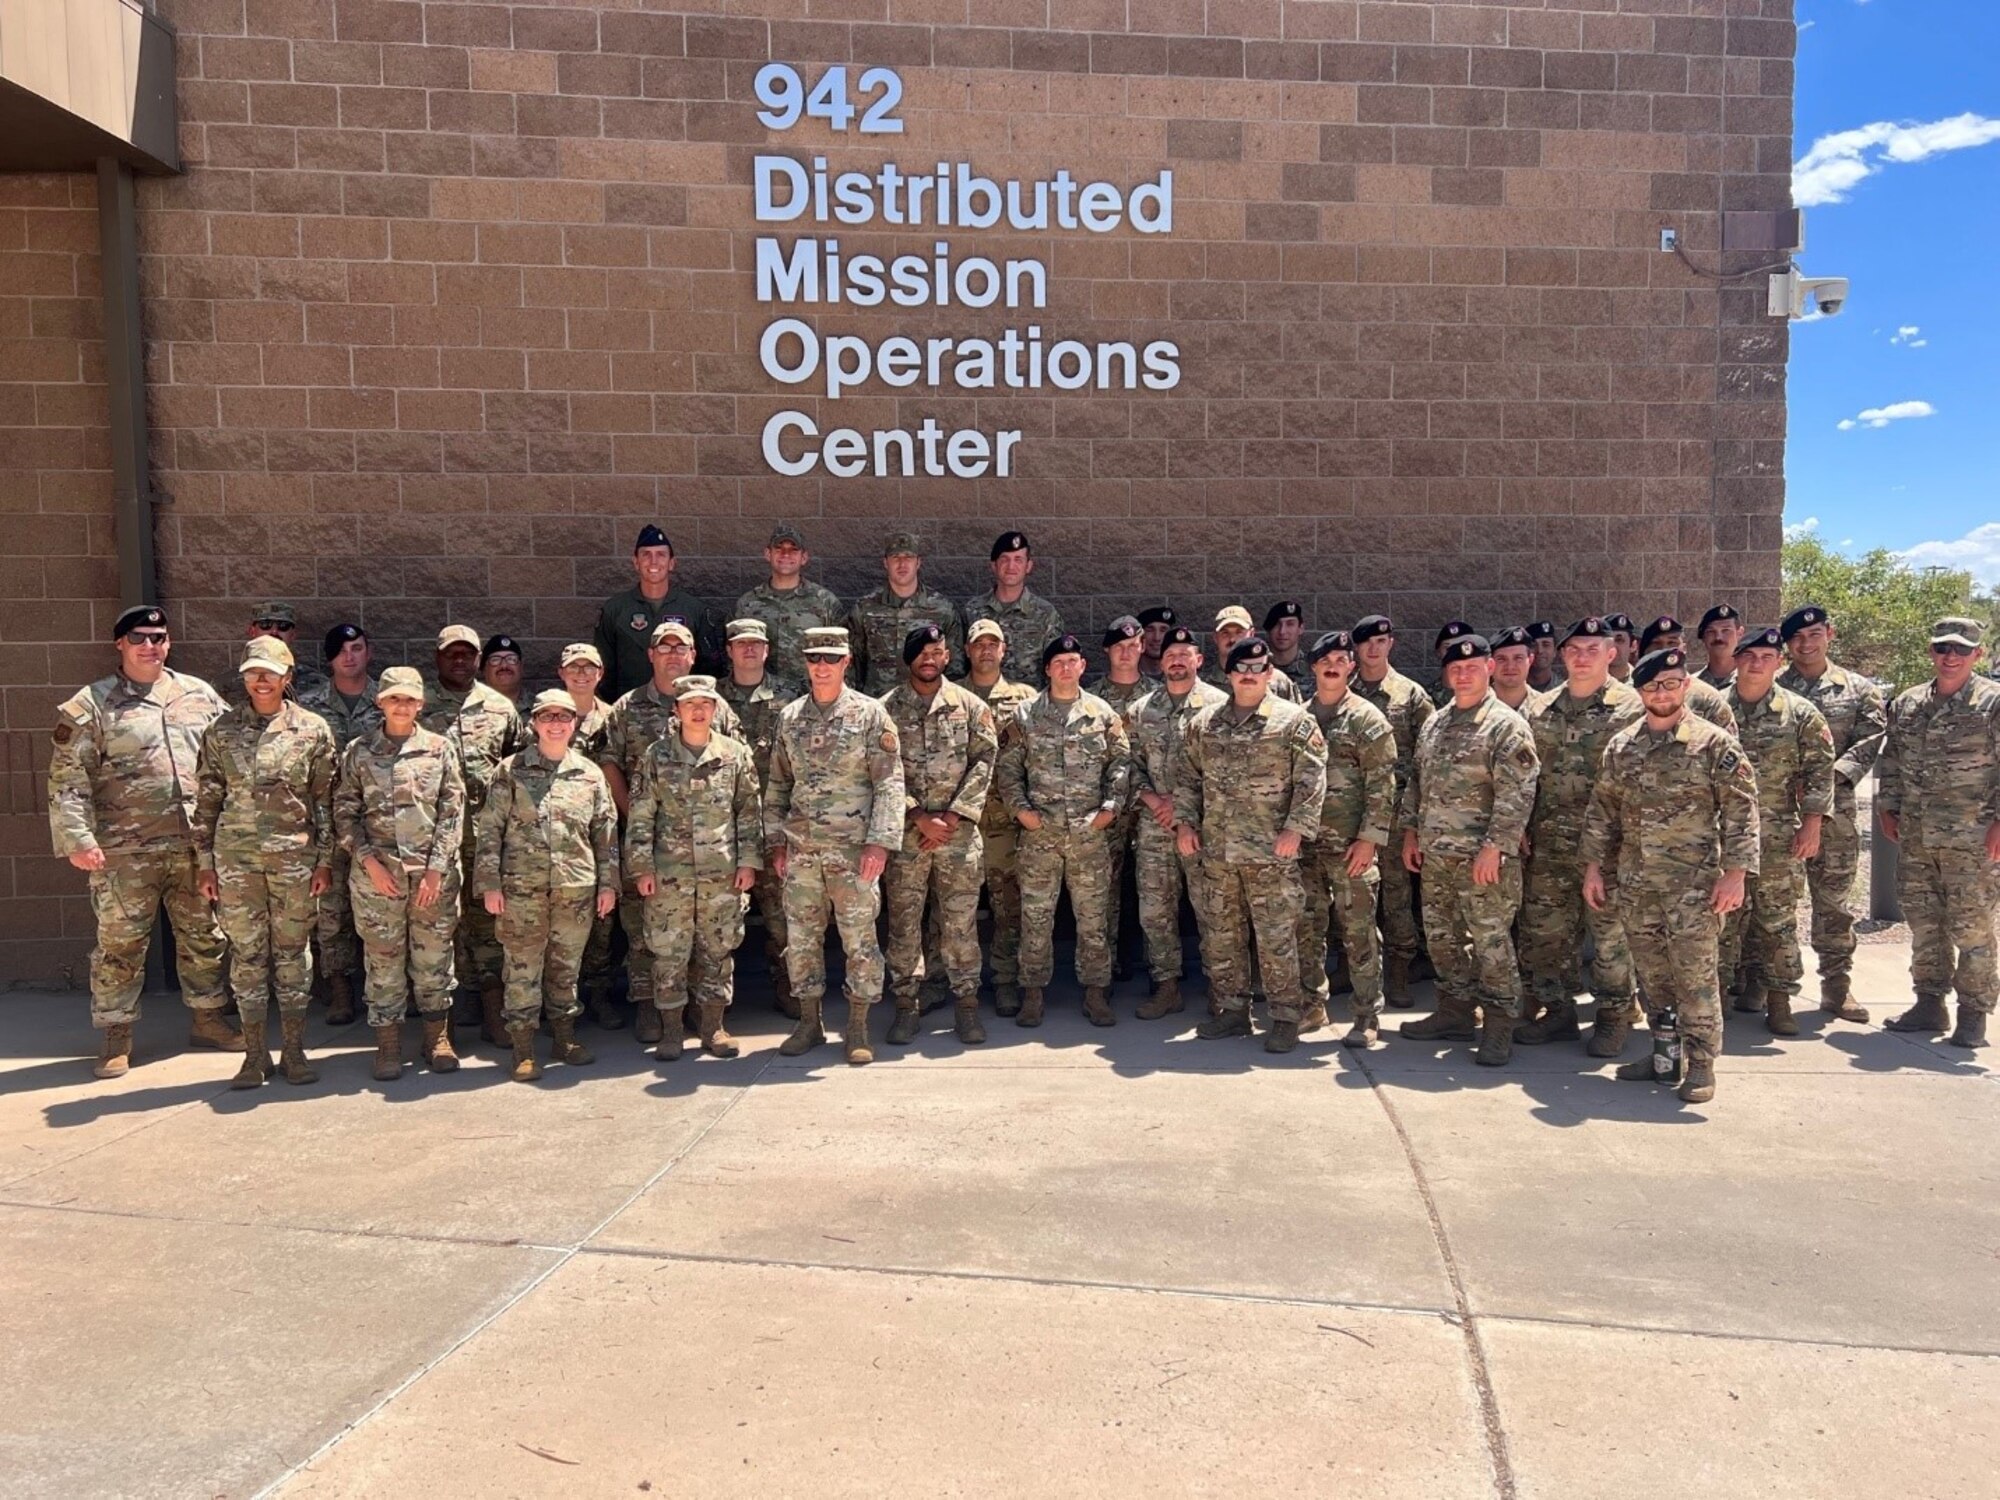 photo of a large group of military members in front of building that says 942 Distributed Mission Operations center